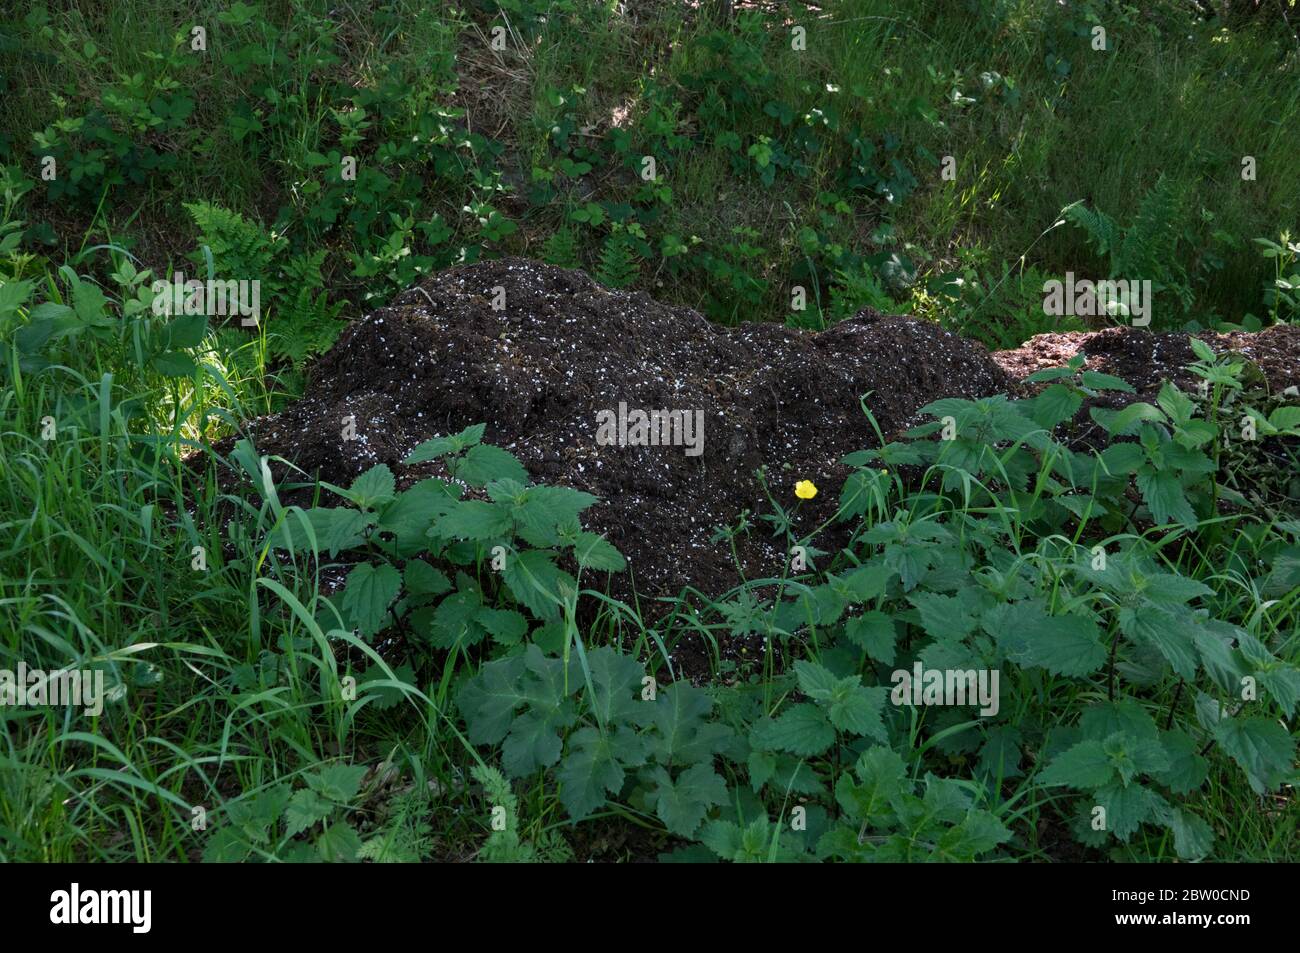 Heap of soil with Perlite grains, added to improve air-holding capabilities and increase drainage ability, dumped after illegal cannabis cultivation Stock Photo